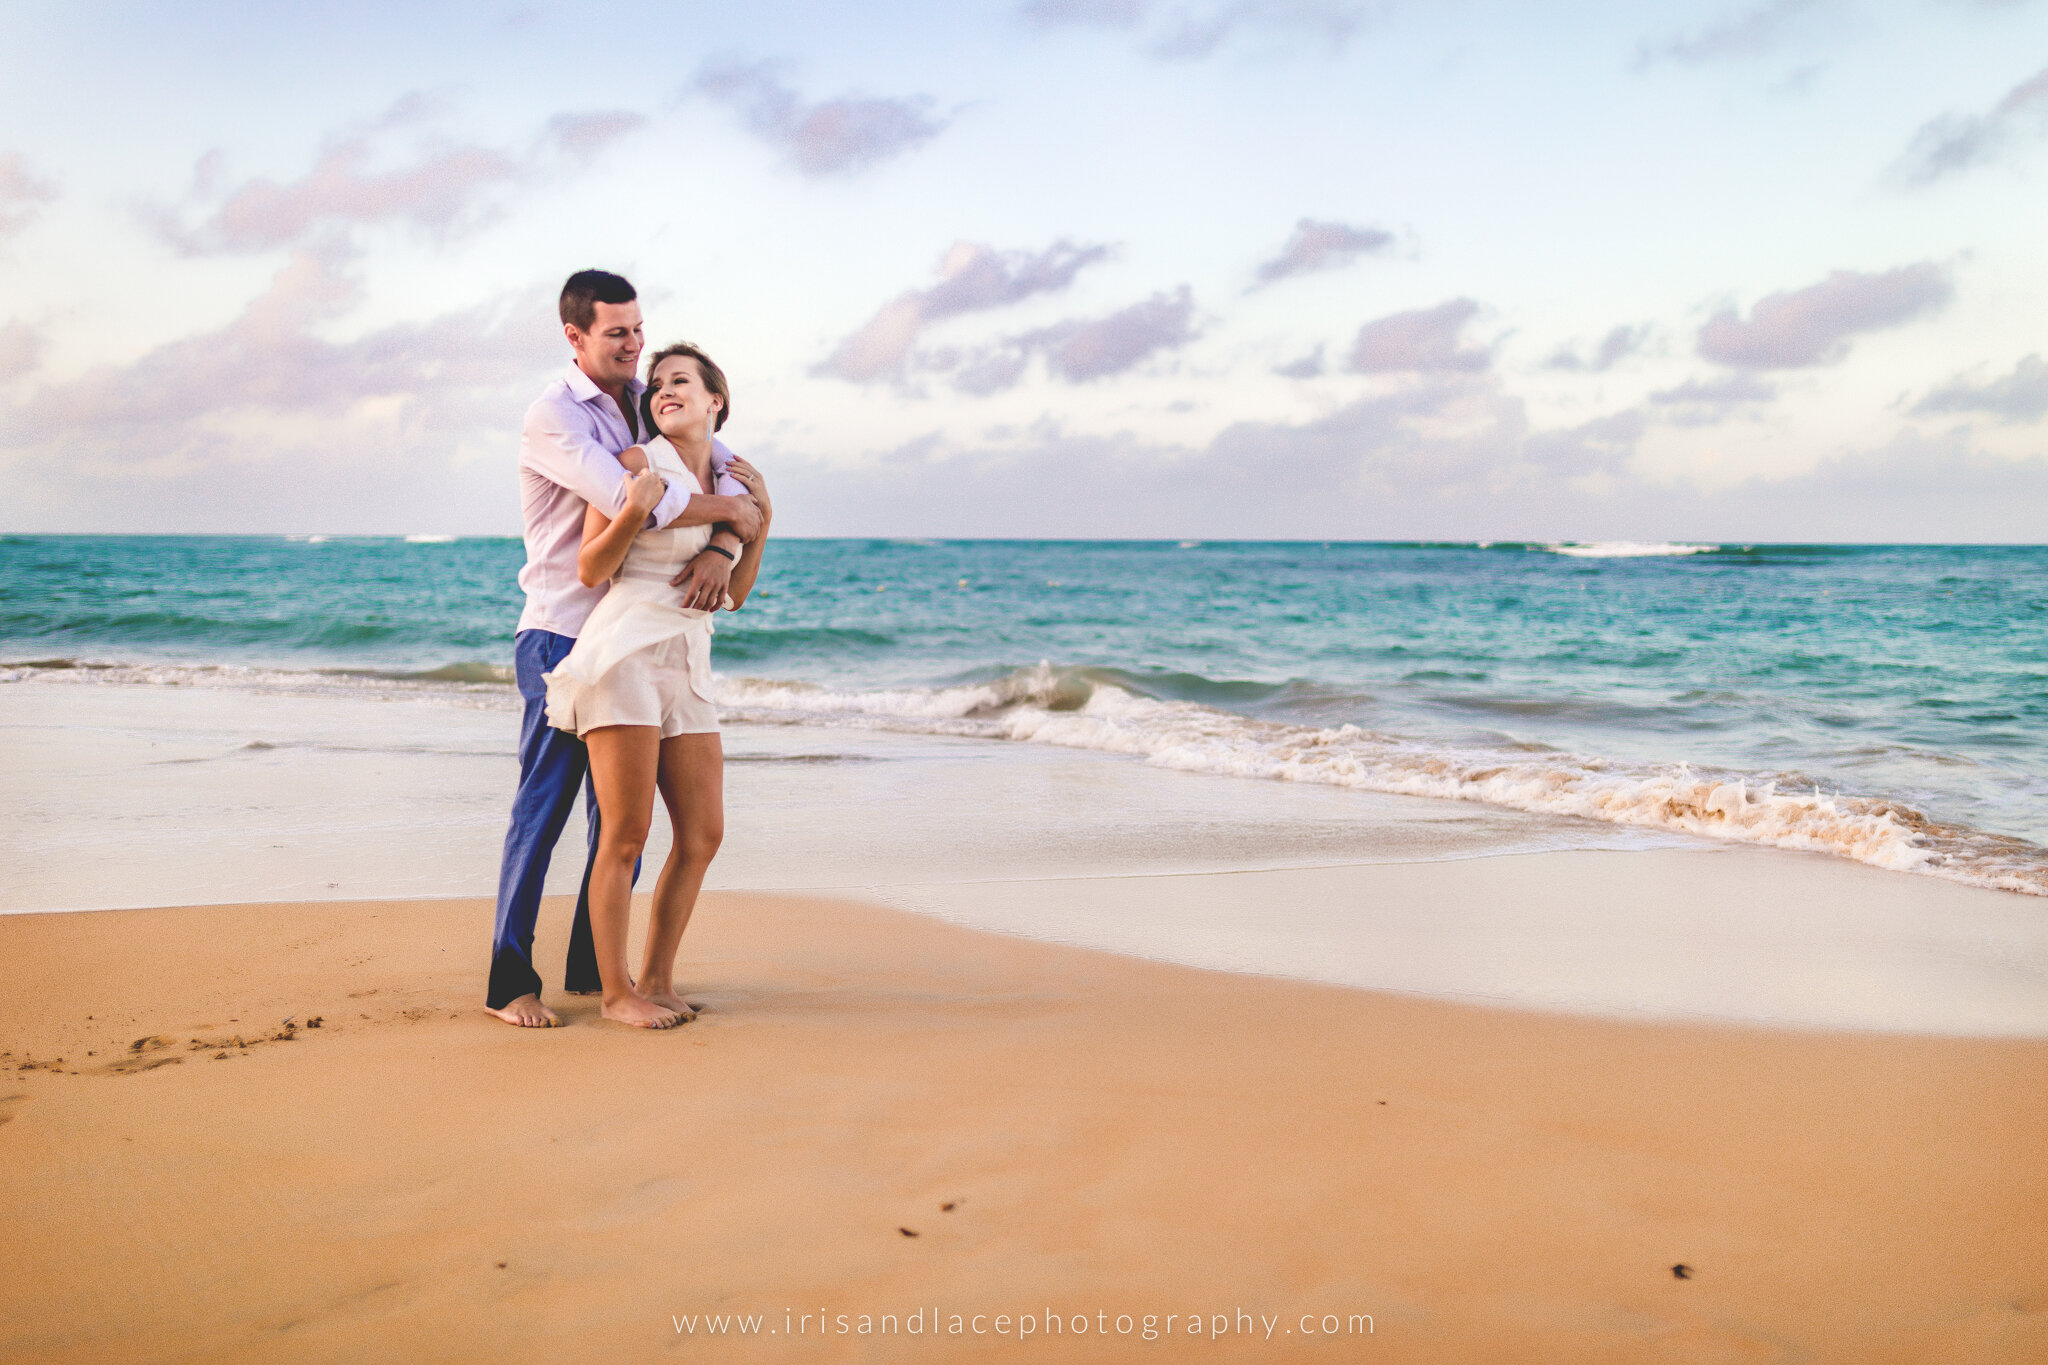 Lifestyle Beach Engagement and Elopement Pictures  |  Iris and Lace Photography